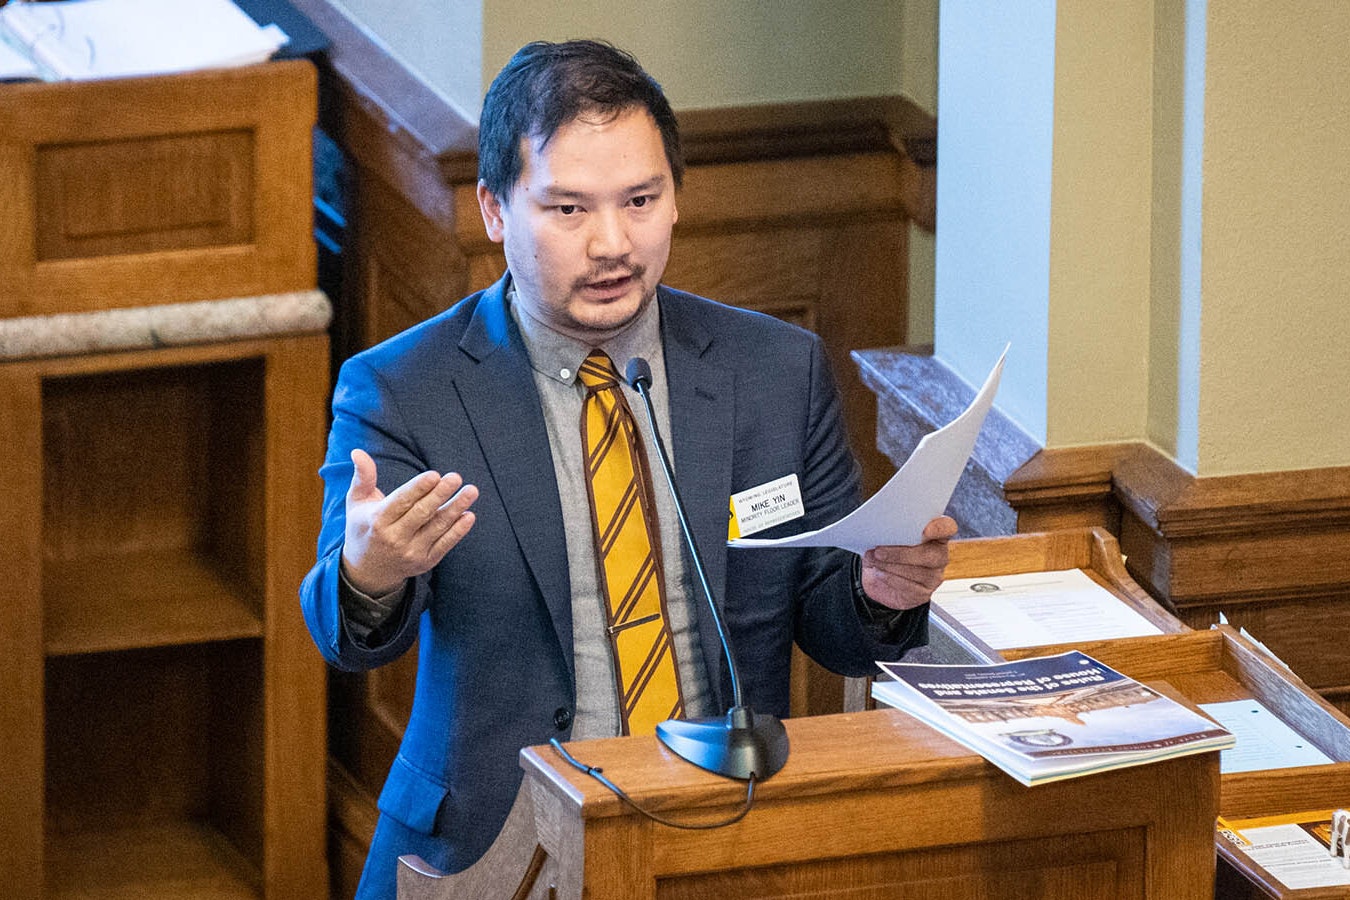 State Rep. Mike Yin, D-Jackson